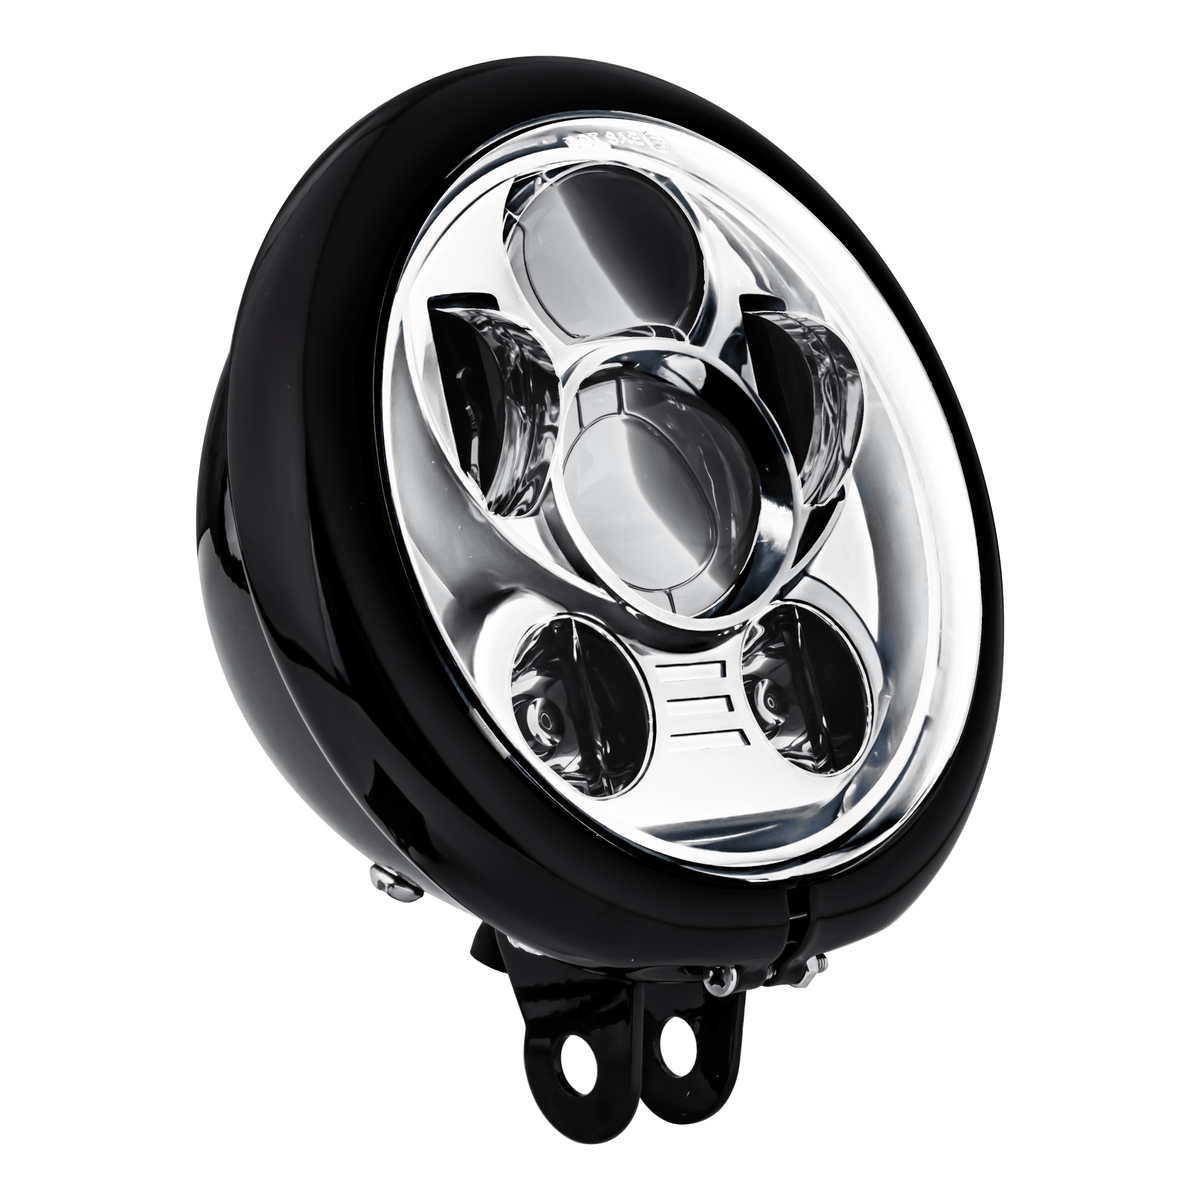 Eagle Lights 5 3/4" LED Headlight Kit for 2018 and Newer Harley Davidson Street Bob, Low Rider, and Softail Standard